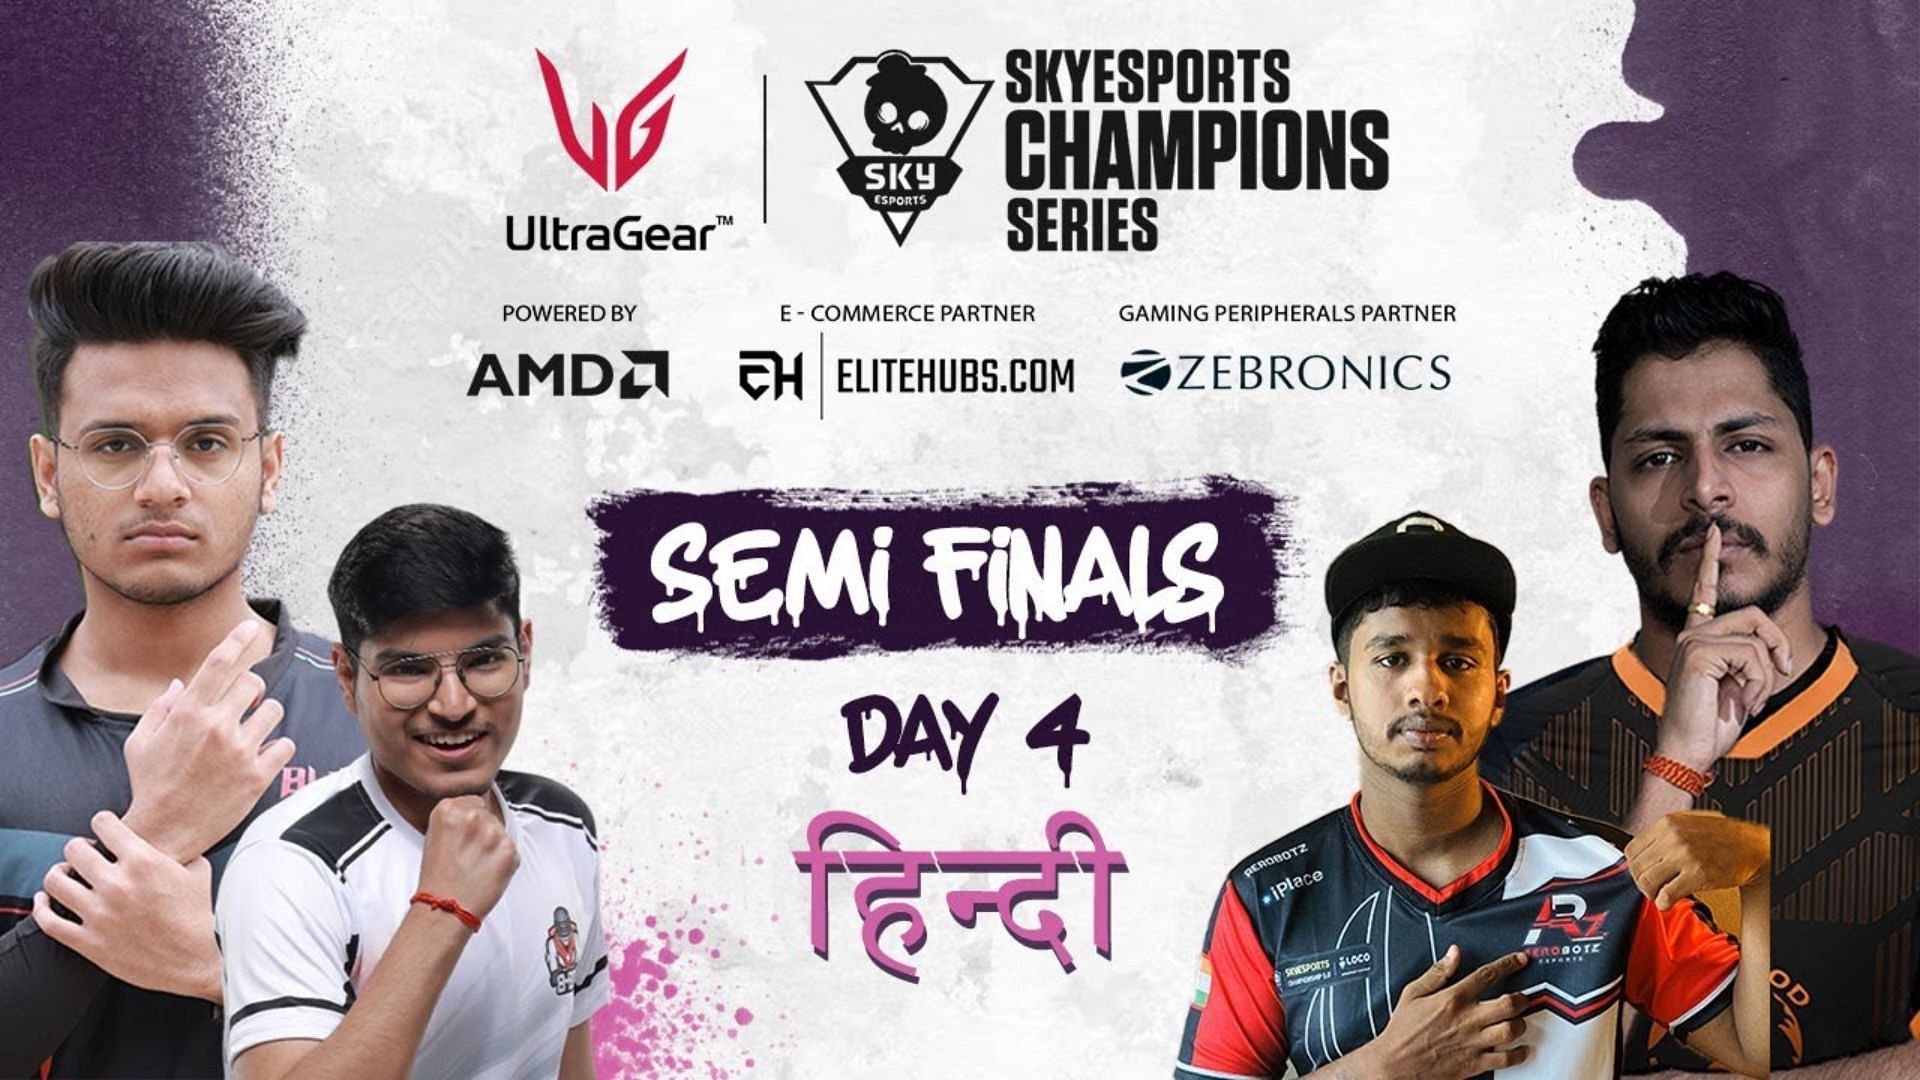 Day 4 of Skyesports BGMI Champions Series Semifinals was held on Saturday (Image via Skyesports)